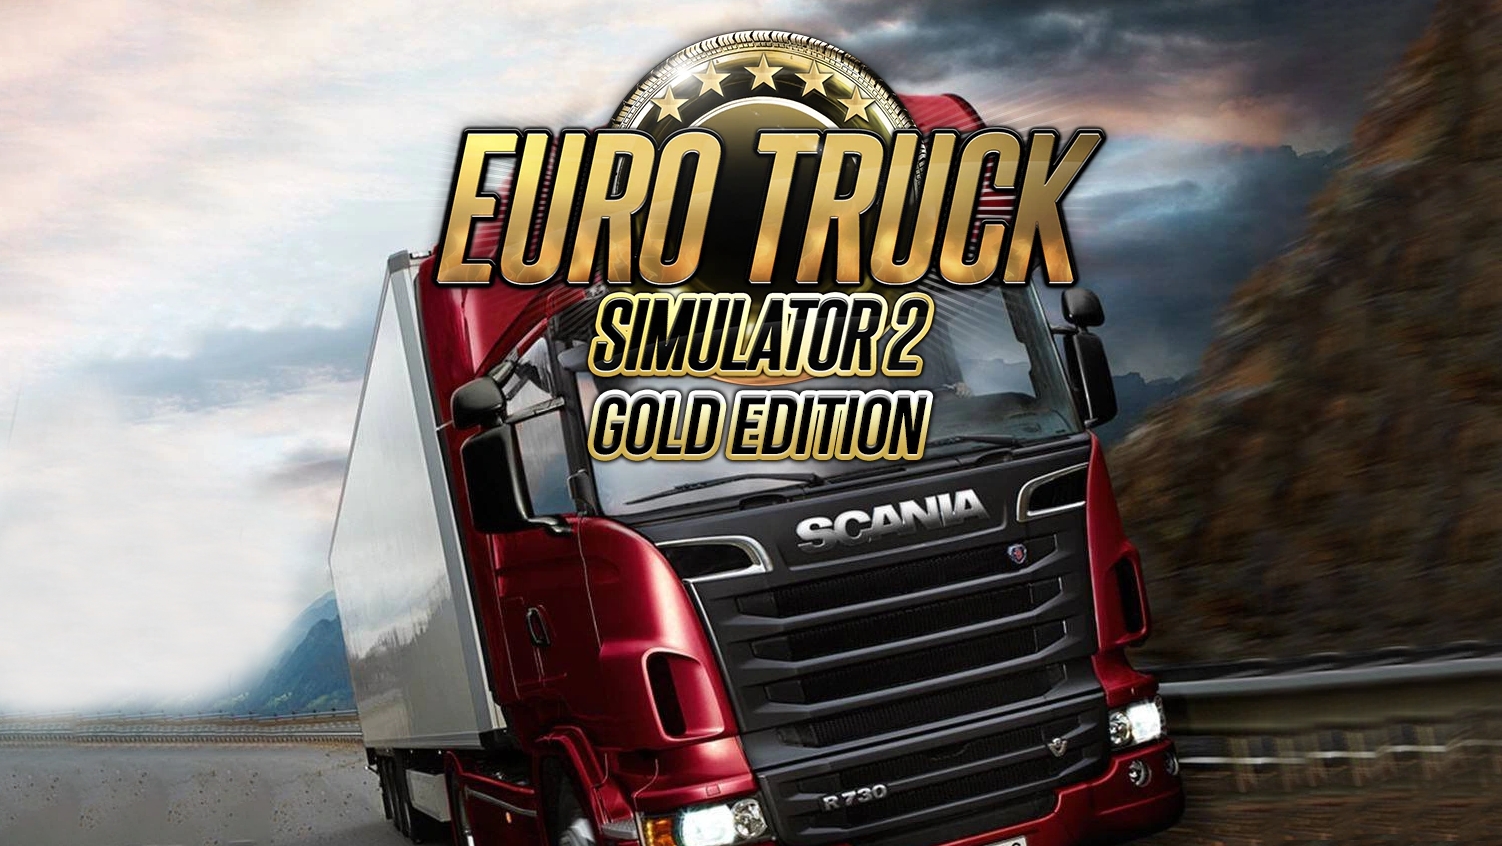 https://gaming-cdn.com/images/products/2309/orig/euro-truck-simulator-2-gold-edition-gold-edition-pc-mac-game-steam-cover.jpg?v=1699955287